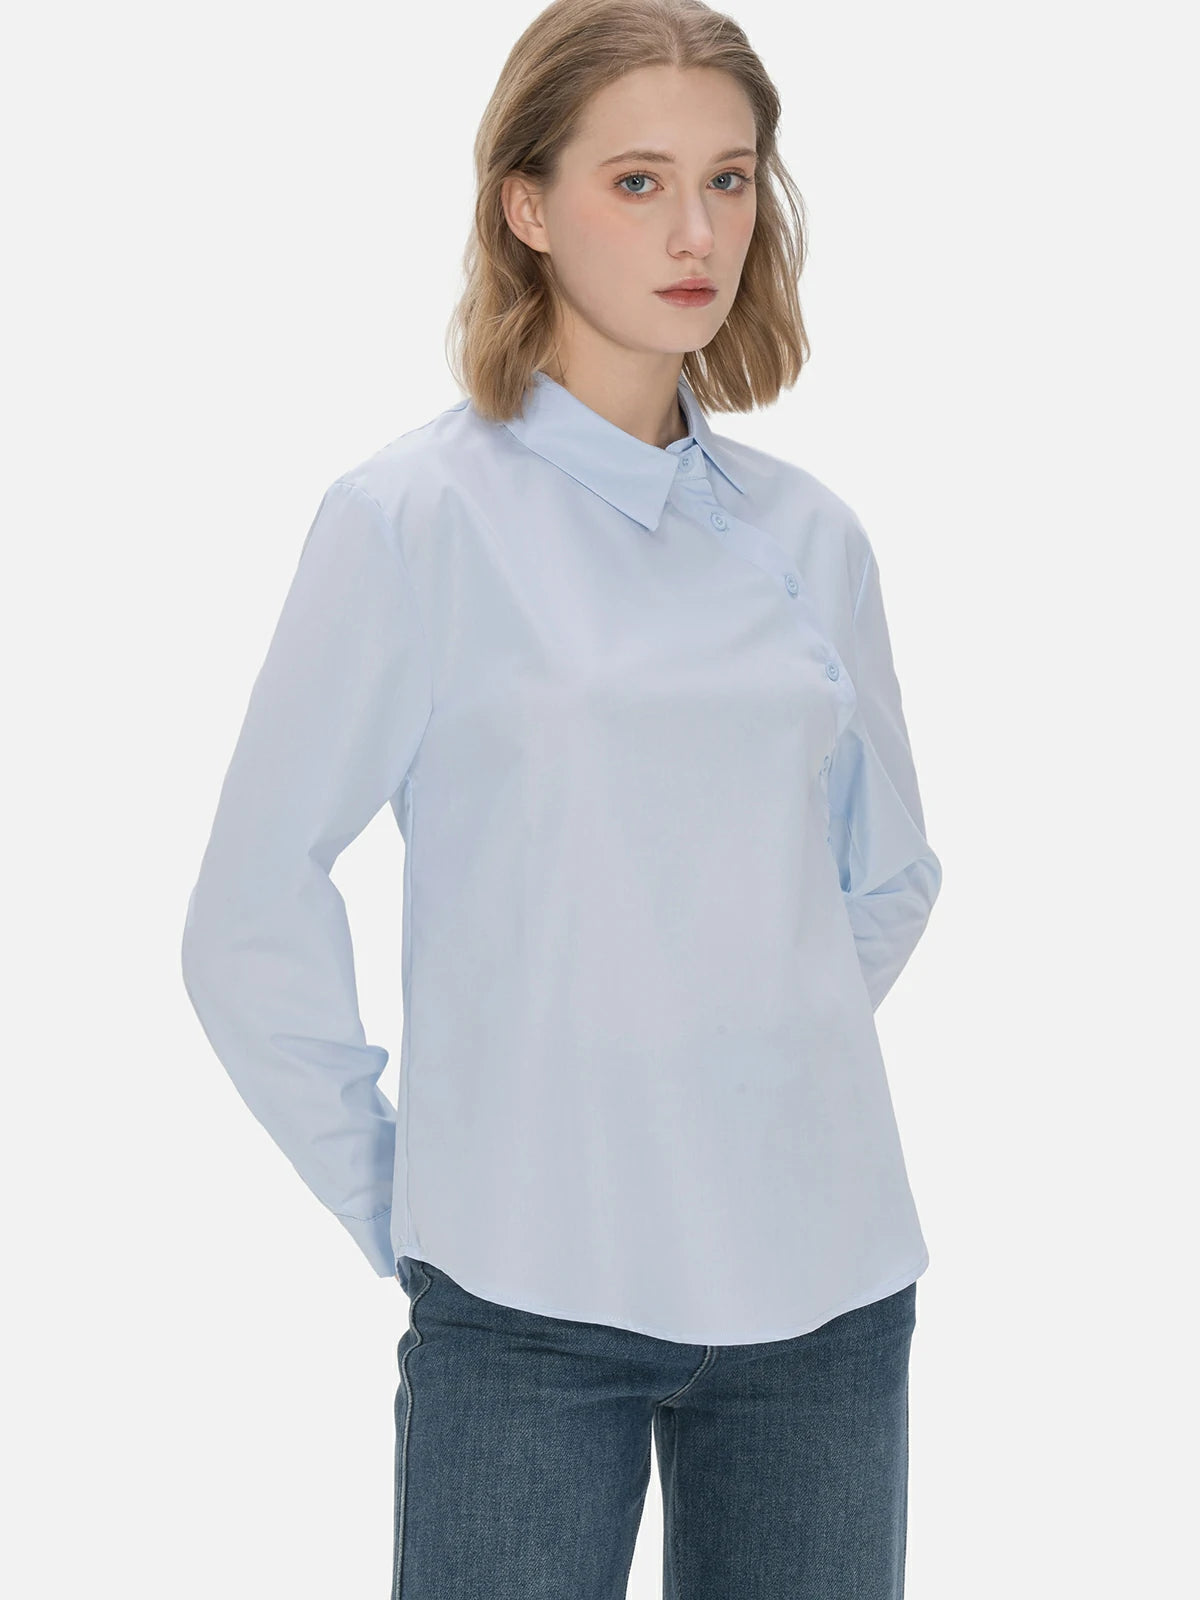 Classic blue ladies&#39; collared shirt with an elegant diagonal button design, tailored to provide a stylish and comfortable fit for different occasions.